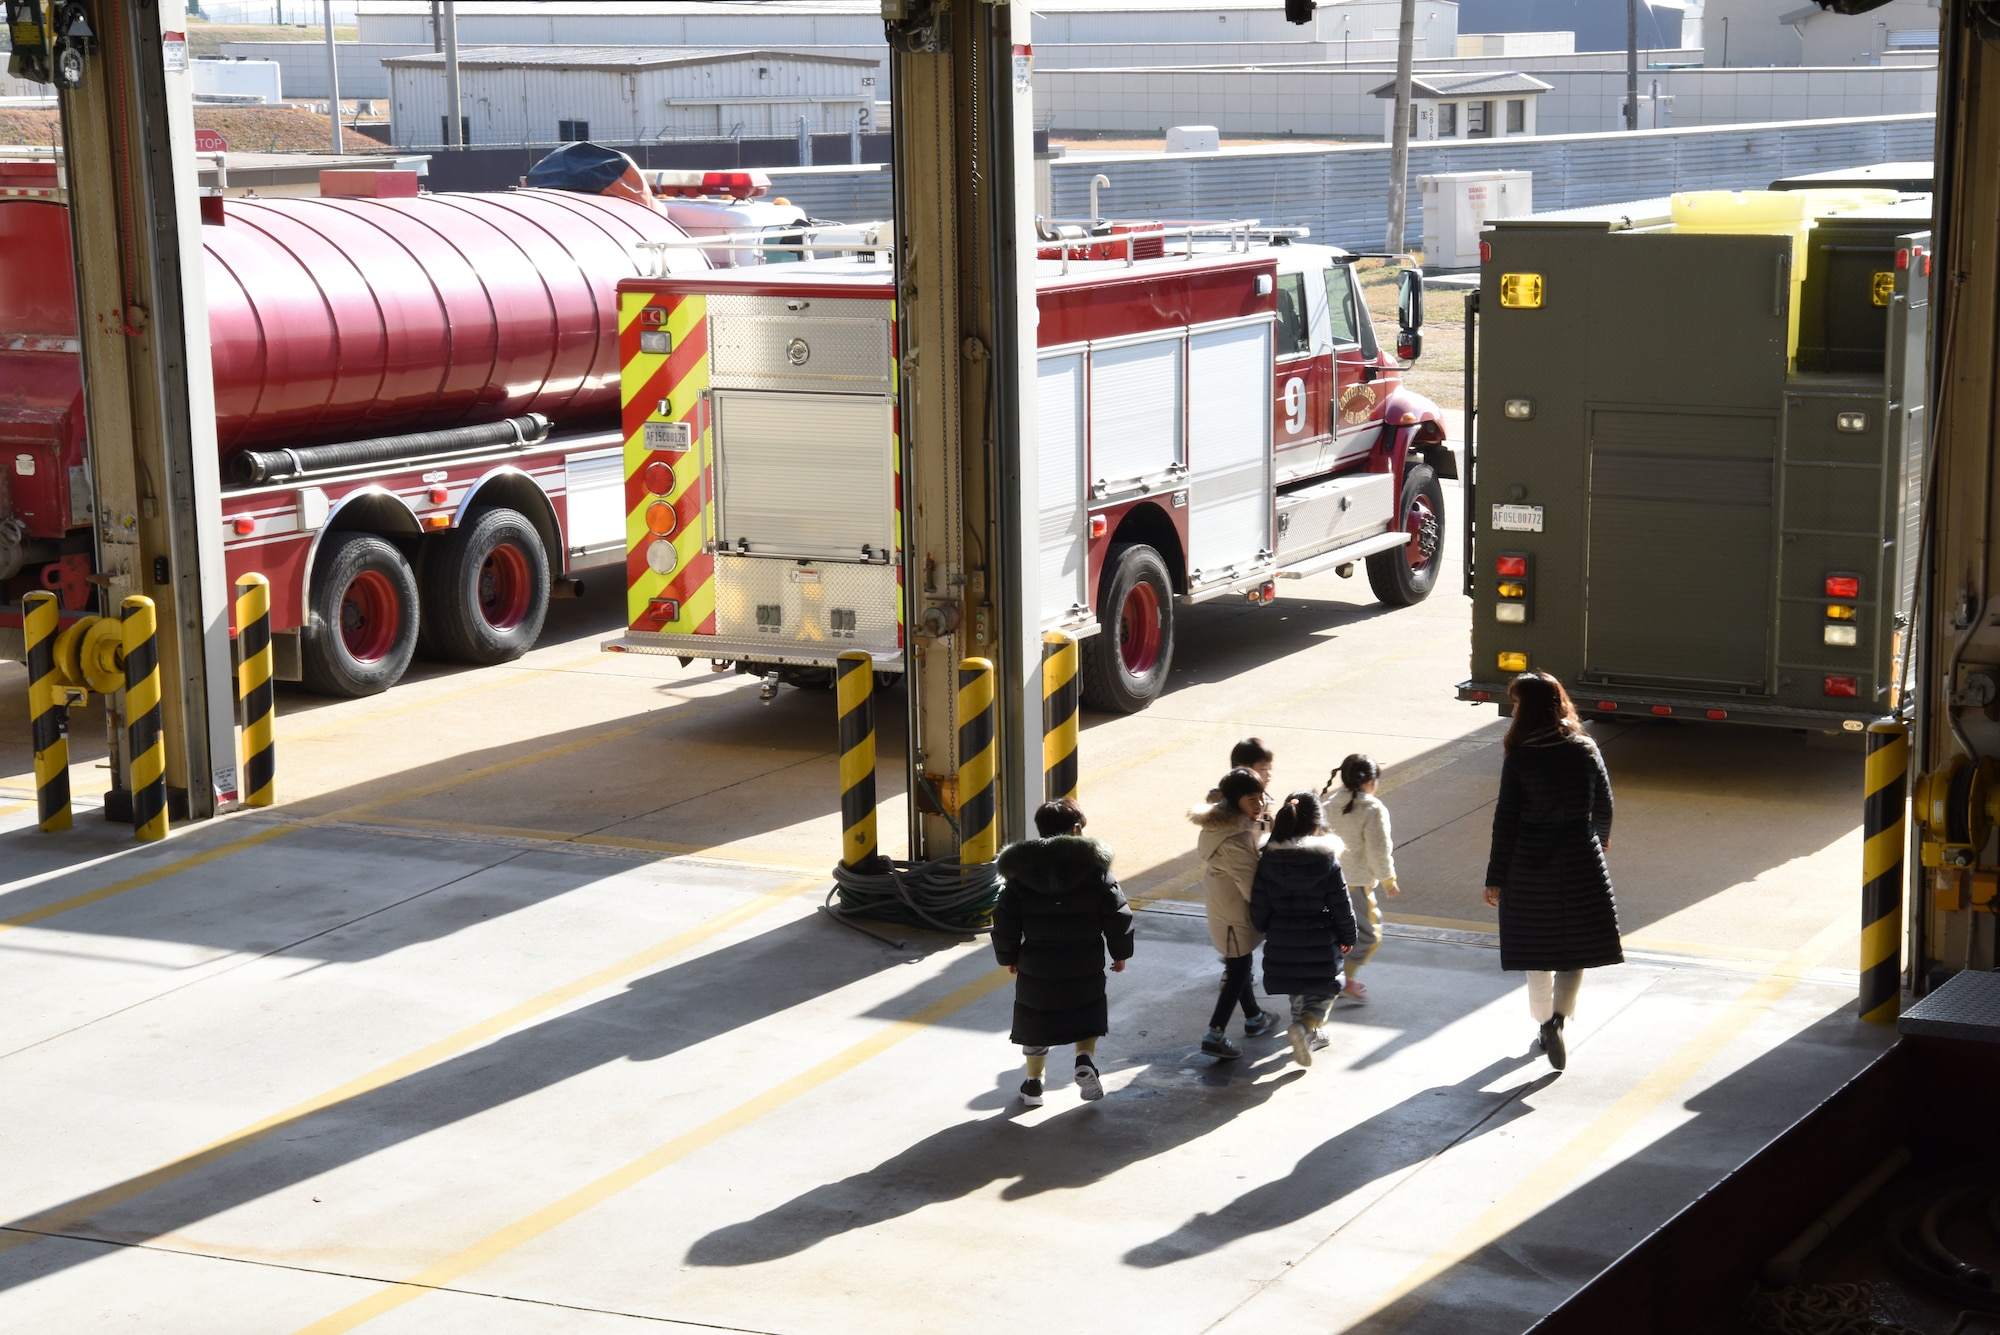 Korean Christian International School students and a teacher exit the 8th Civil Engineer Squadron fire house at Kunsan Air Base, Republic of Korea, Nov. 30, 2018. The students got the chance to explore several fire trucks and see firefighters live in action. (U.S. Air Force photo by Staff Sgt. Joshua Edwards)